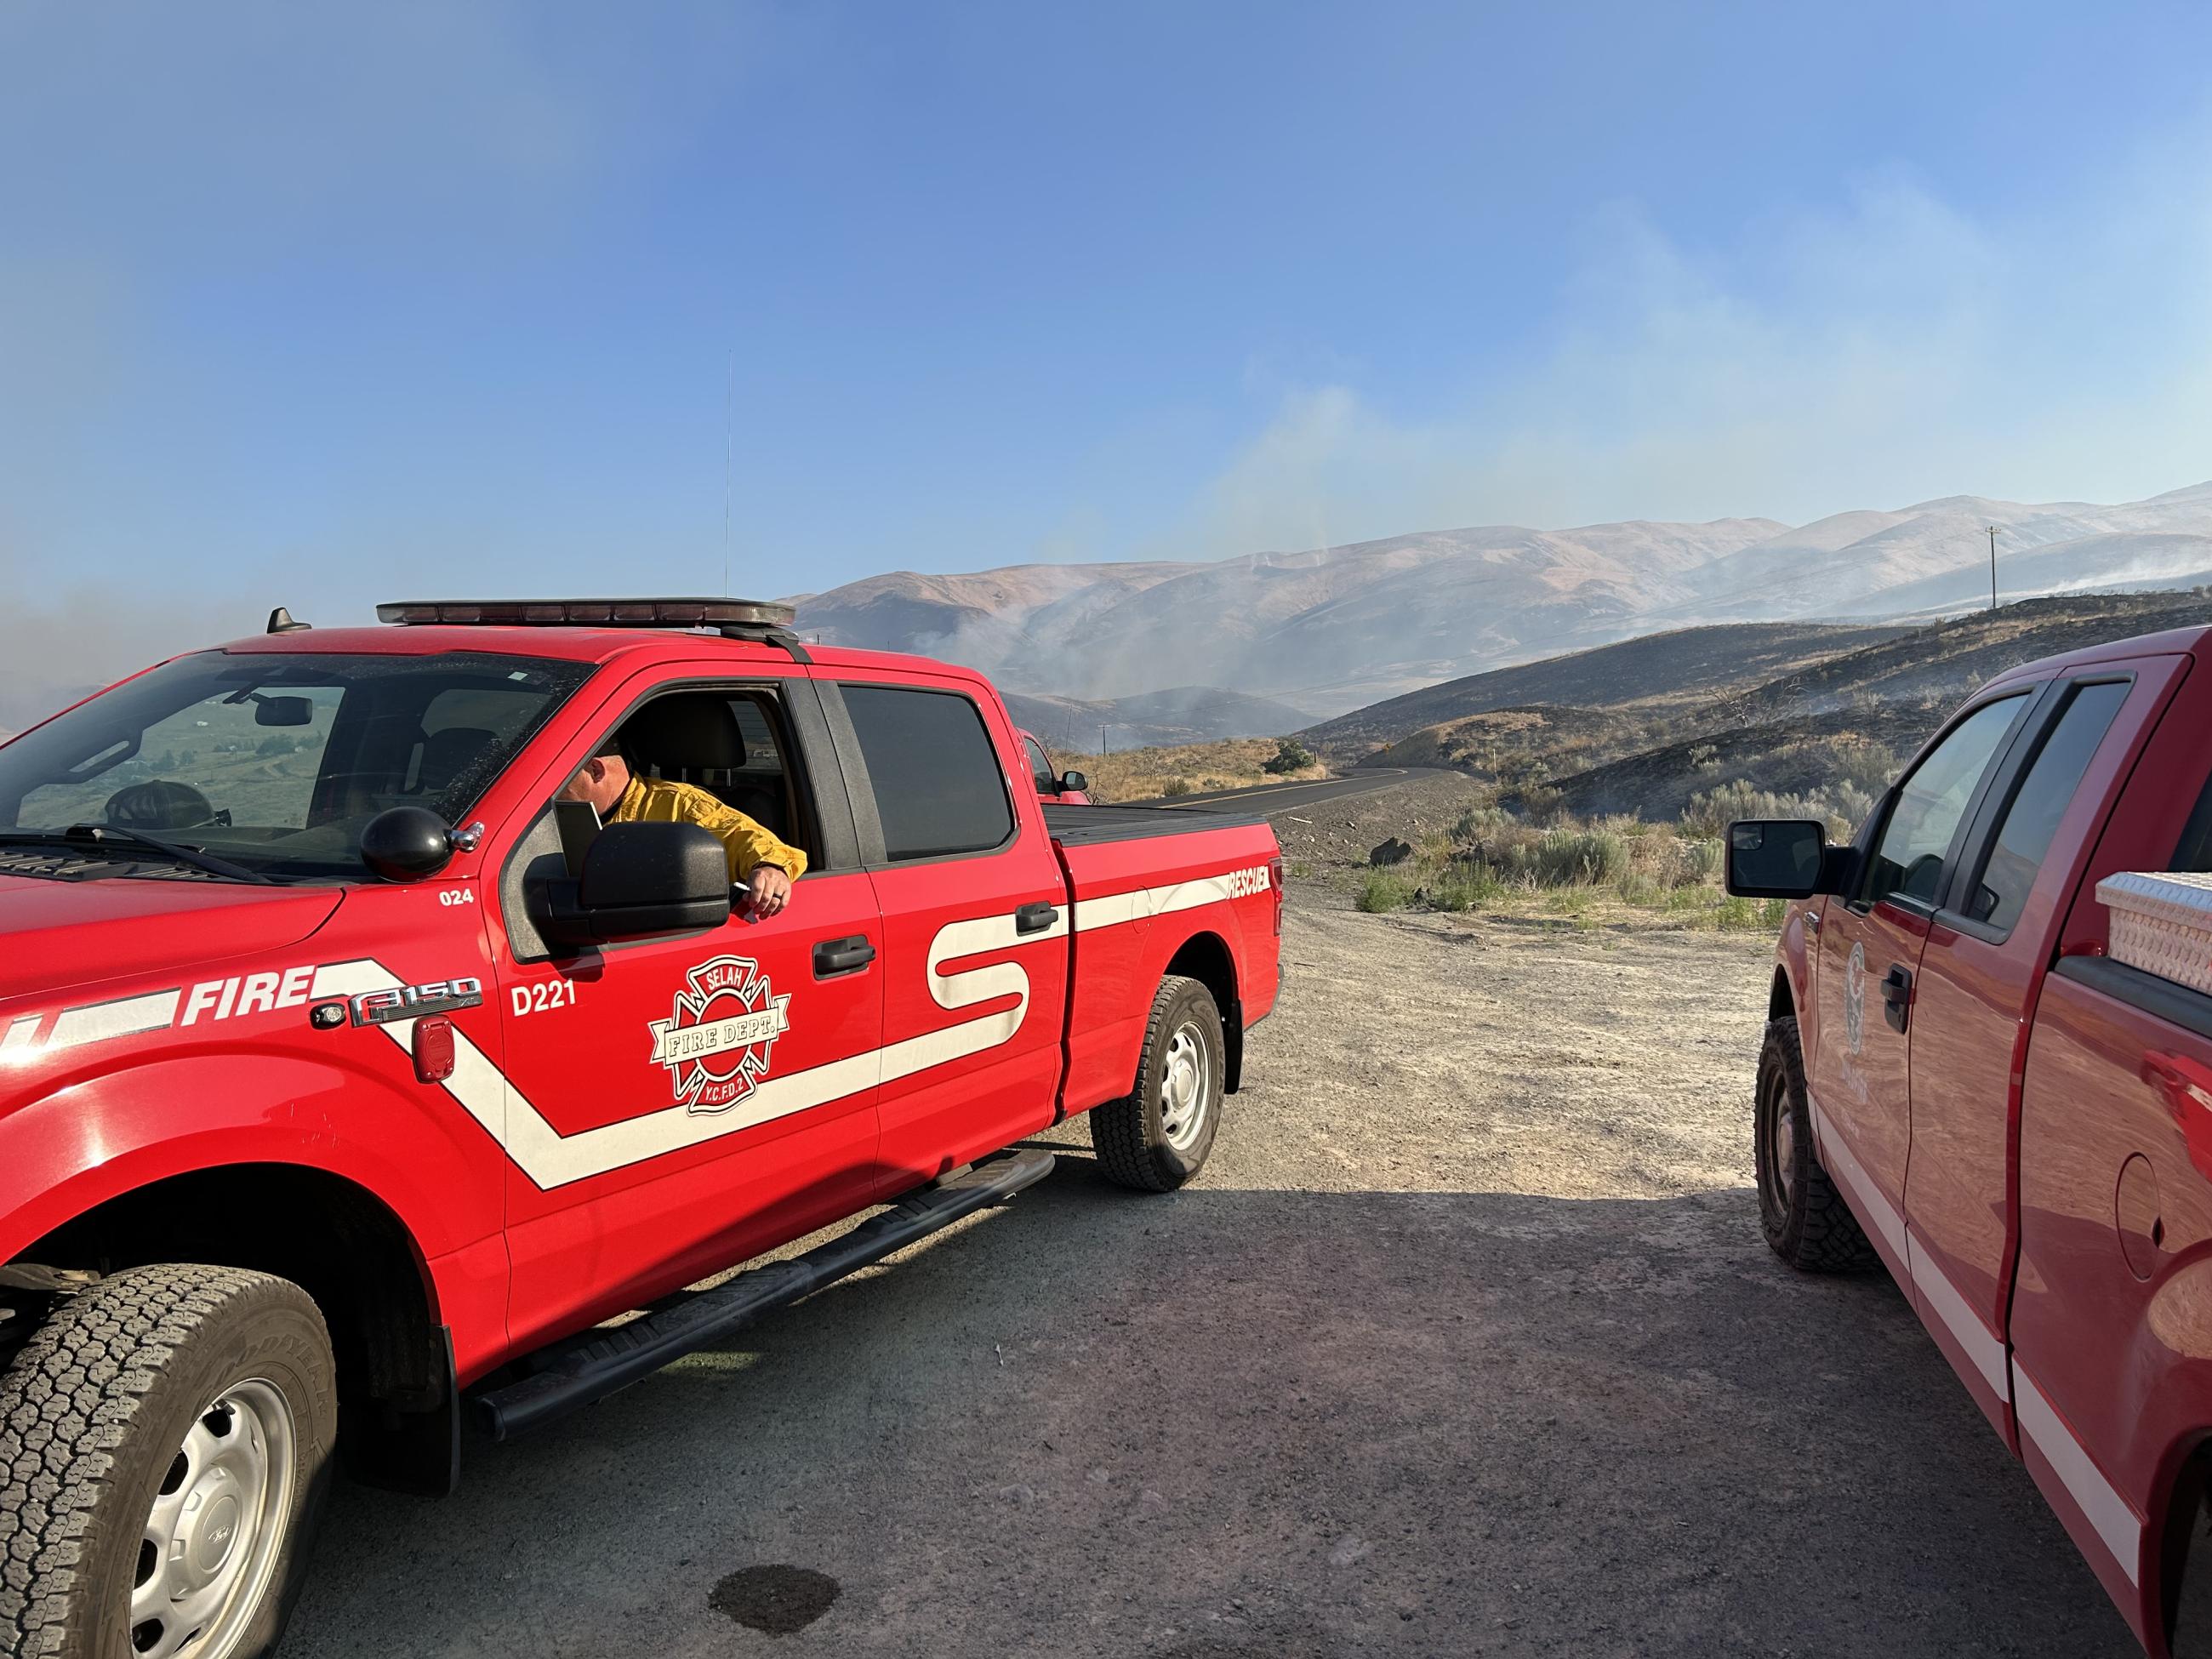 Command Staff monitor the Black Canyon Fire